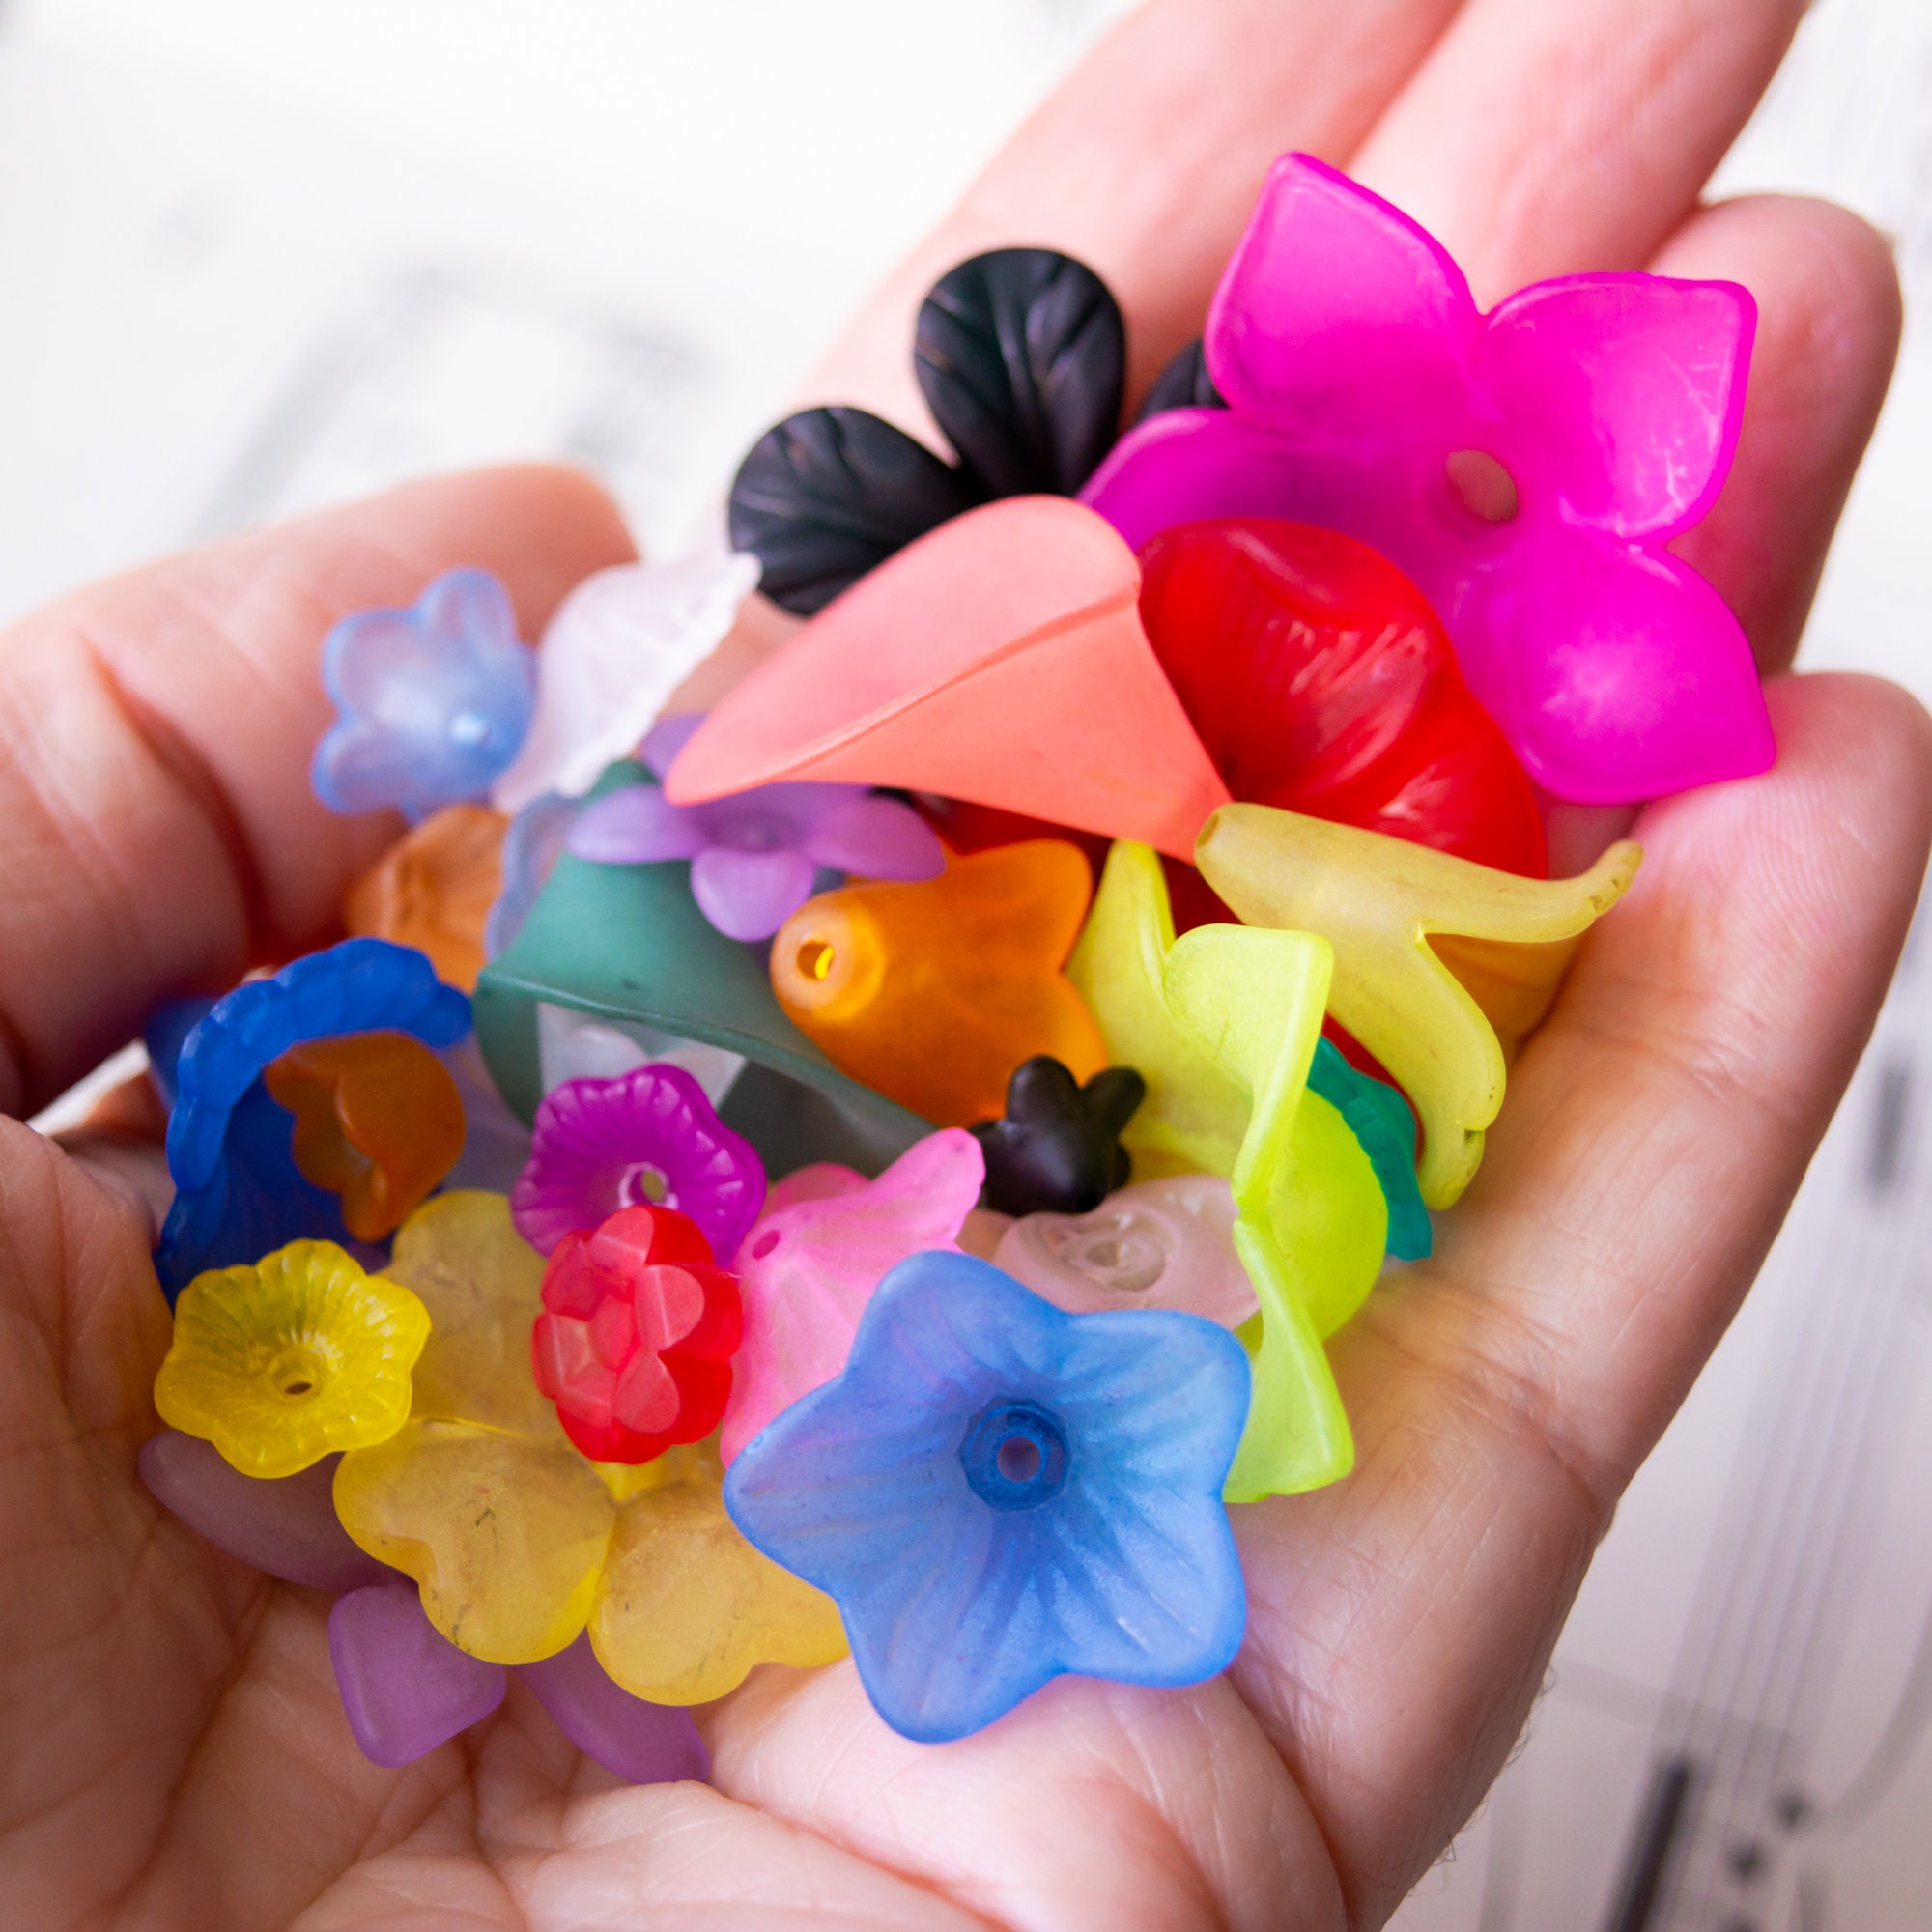 Transparent Acrylic Flower Beads in Assorted Styles and Colors, Clear  Colorful Vintage Themed Floral Mixed Lot, 6mm to 27mm Size Assortment 